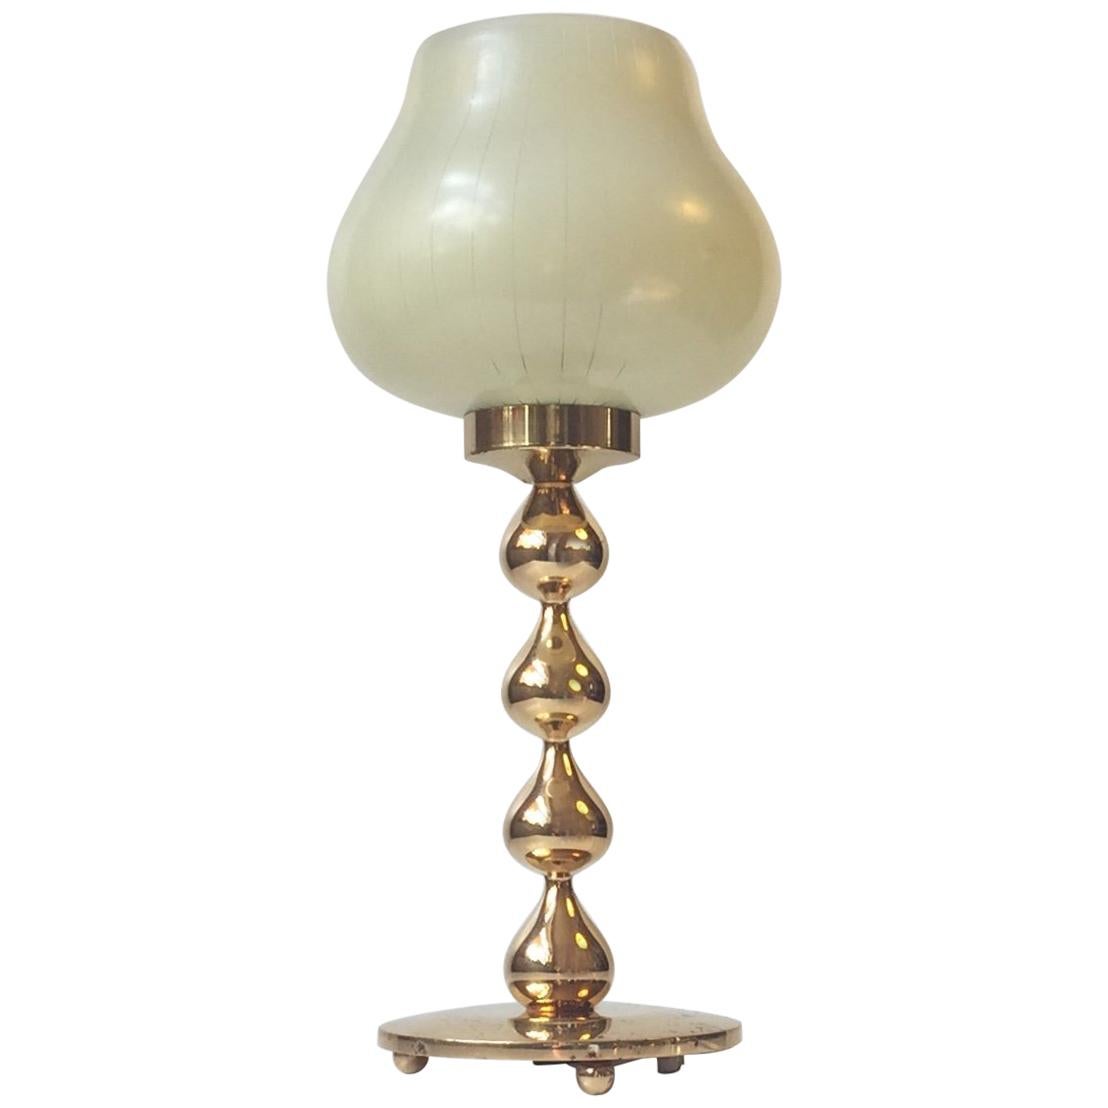 Midcentury 24-Carat Gold-Plated Table Lamp by Hugo Asmussen, 1960s